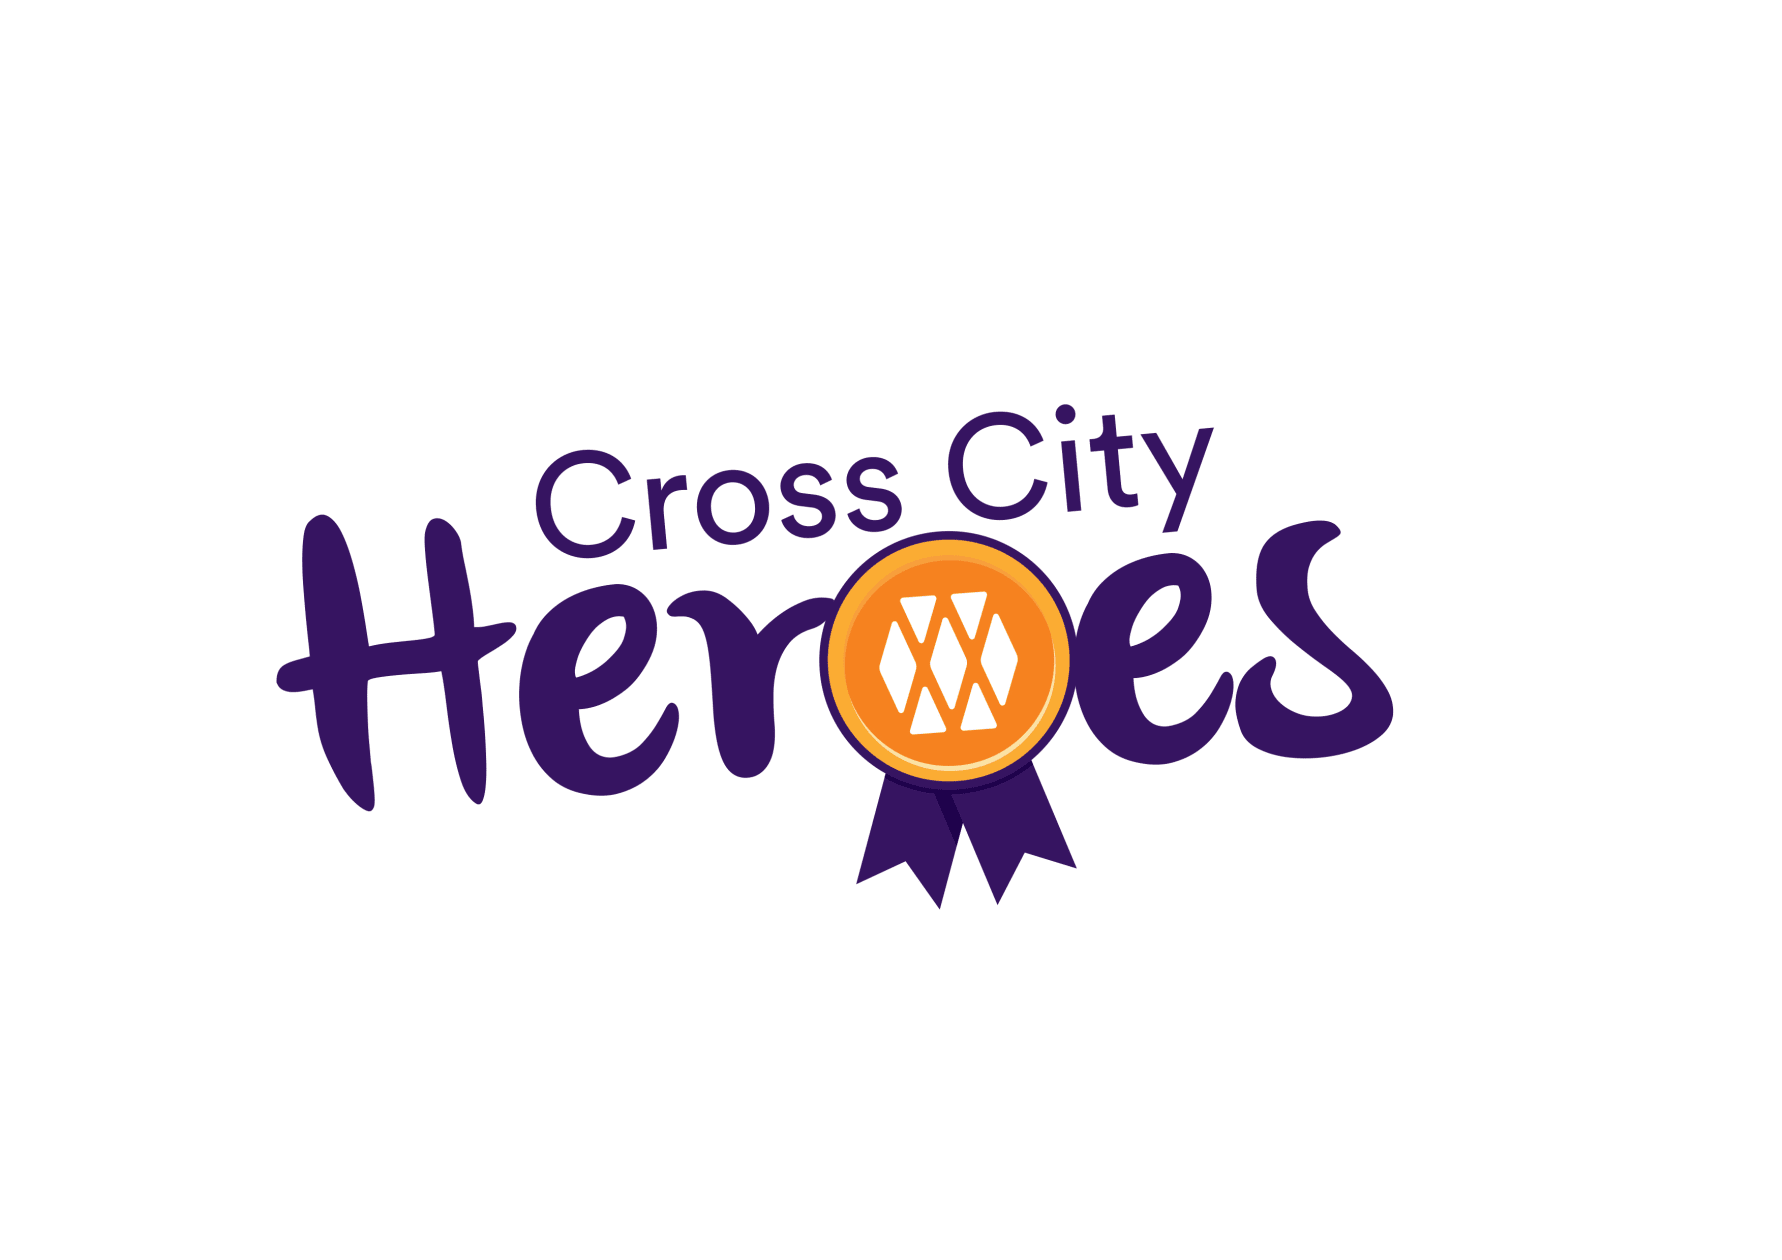 Cross City Heroes to receive railway station recognition